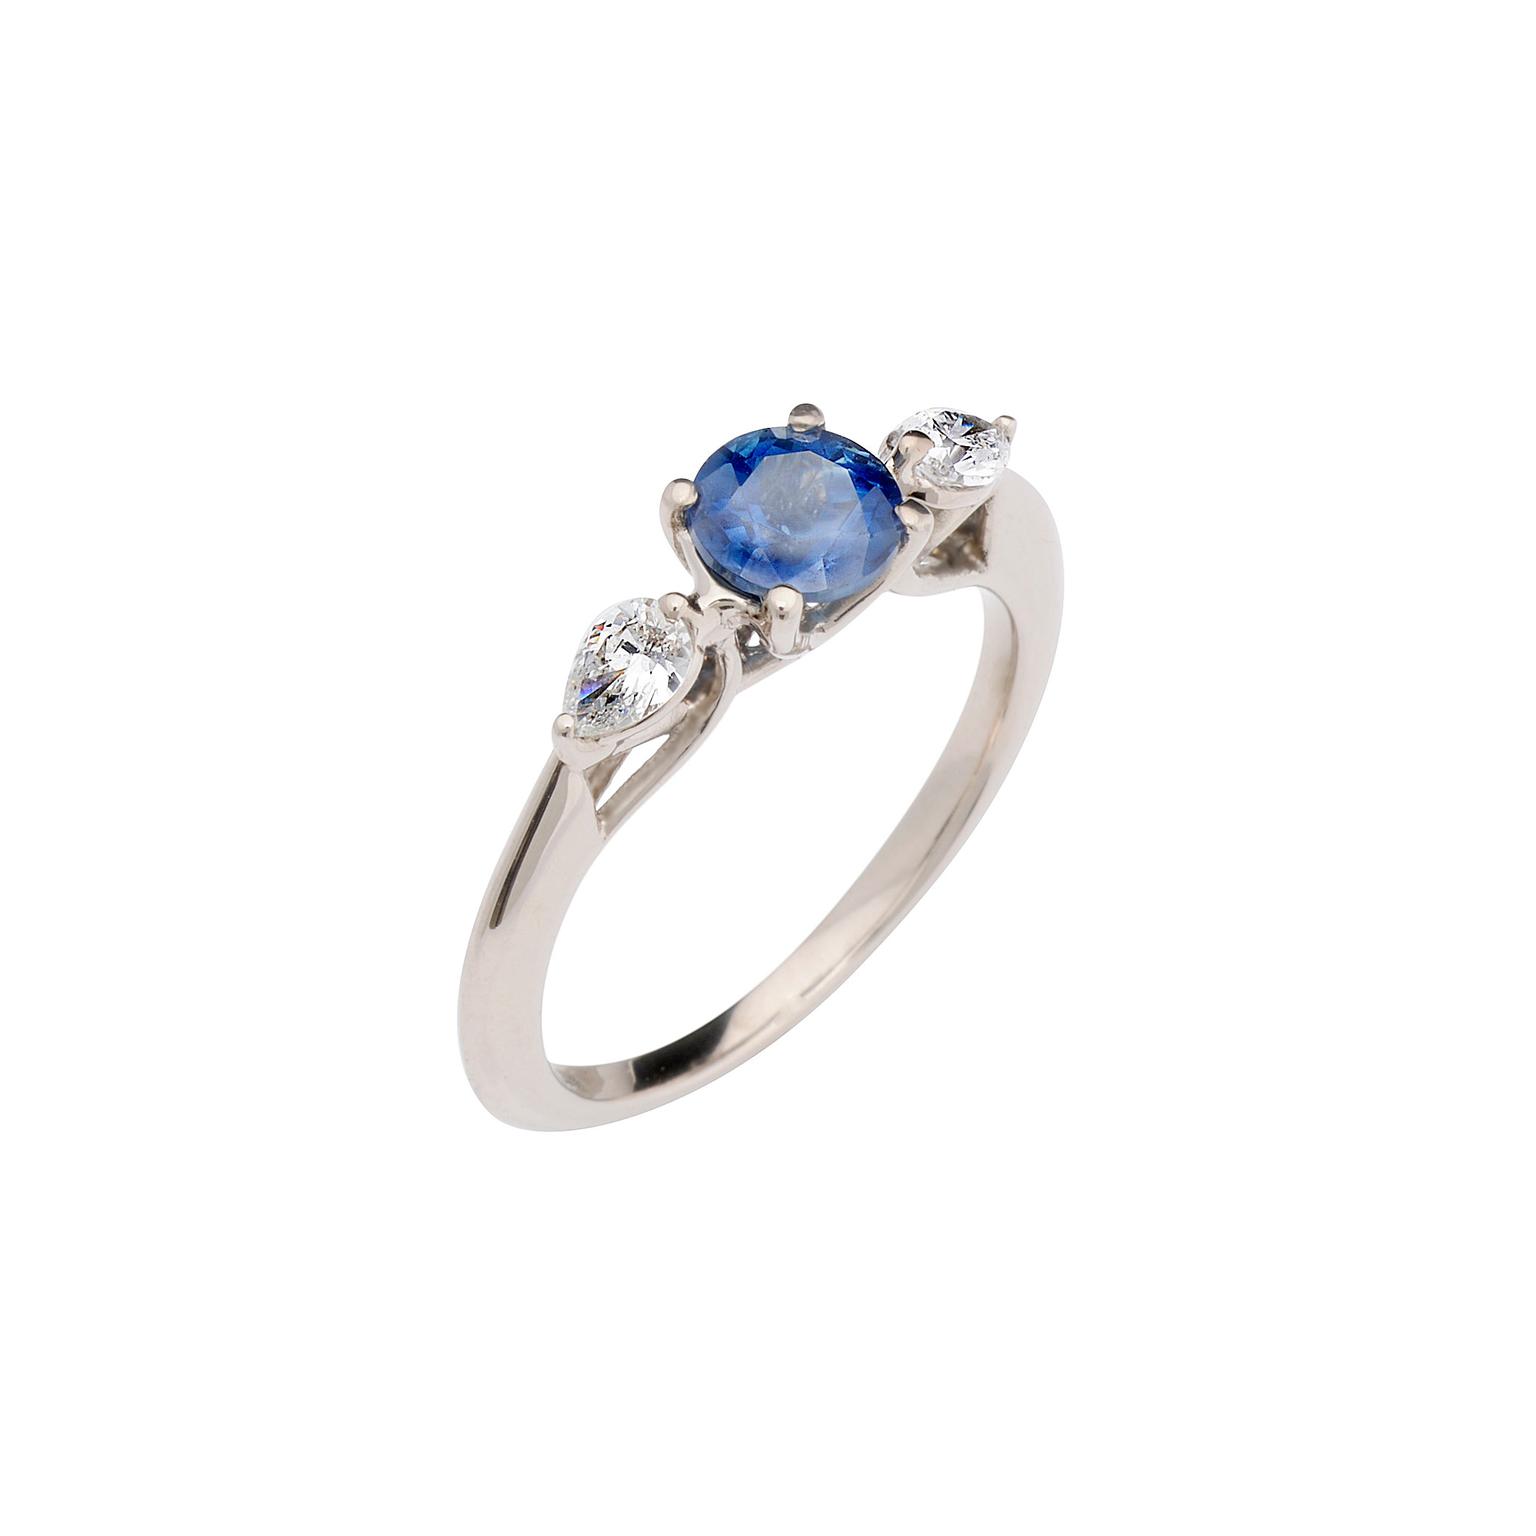 Trilogy sapphire engagement ring with 